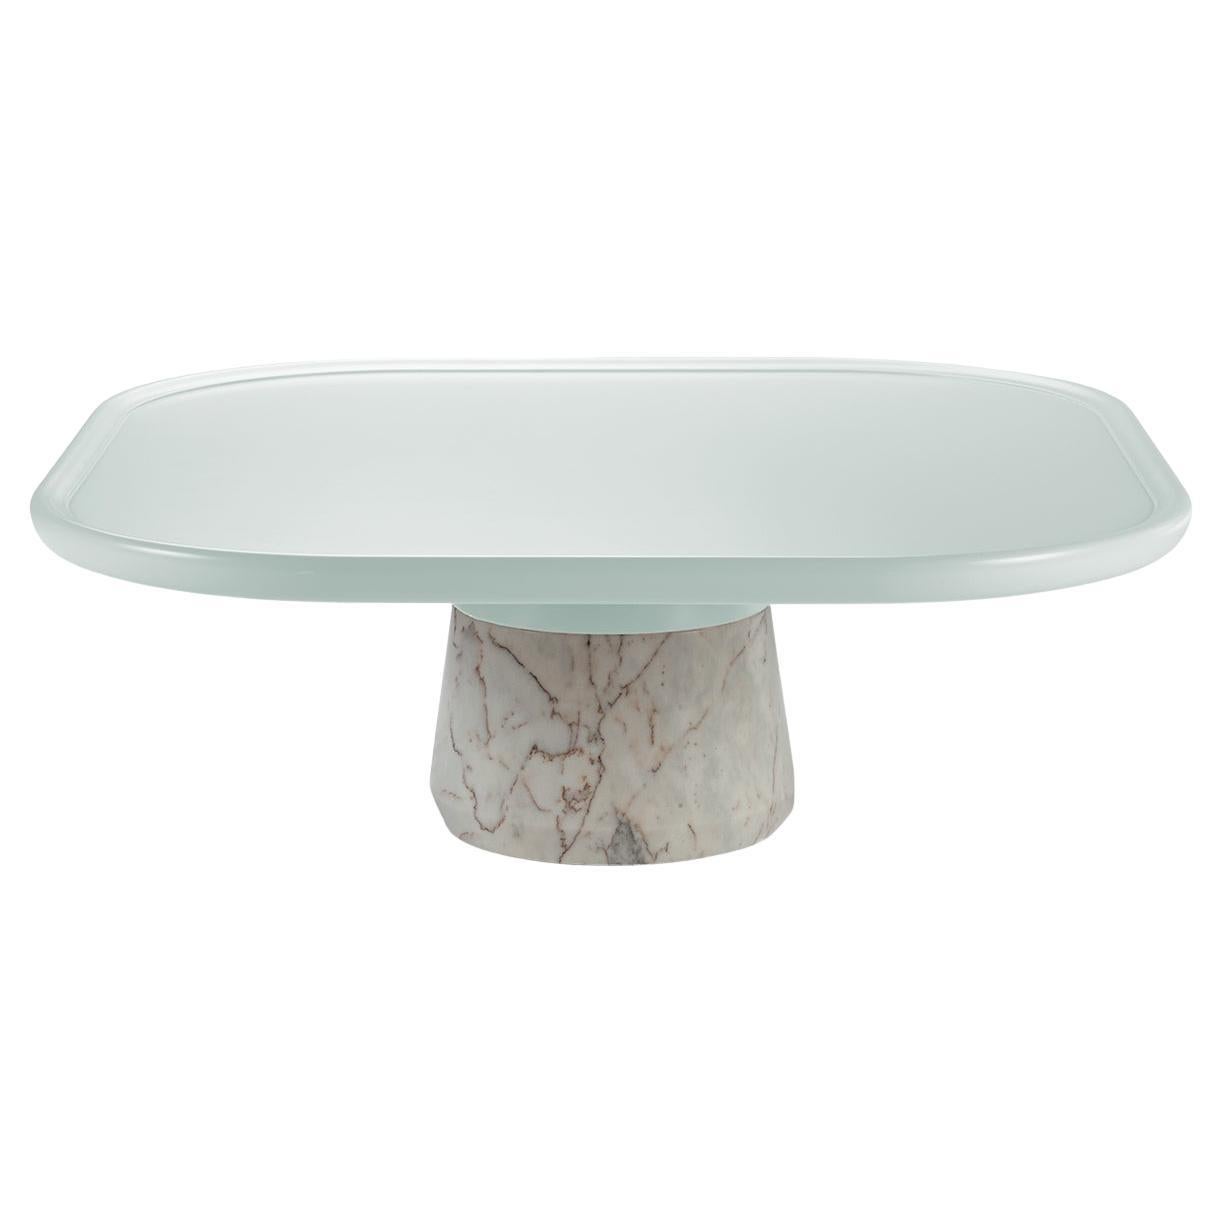 Portuguese Center Table Poppy with Jade Top and White Marble Base by Mambo